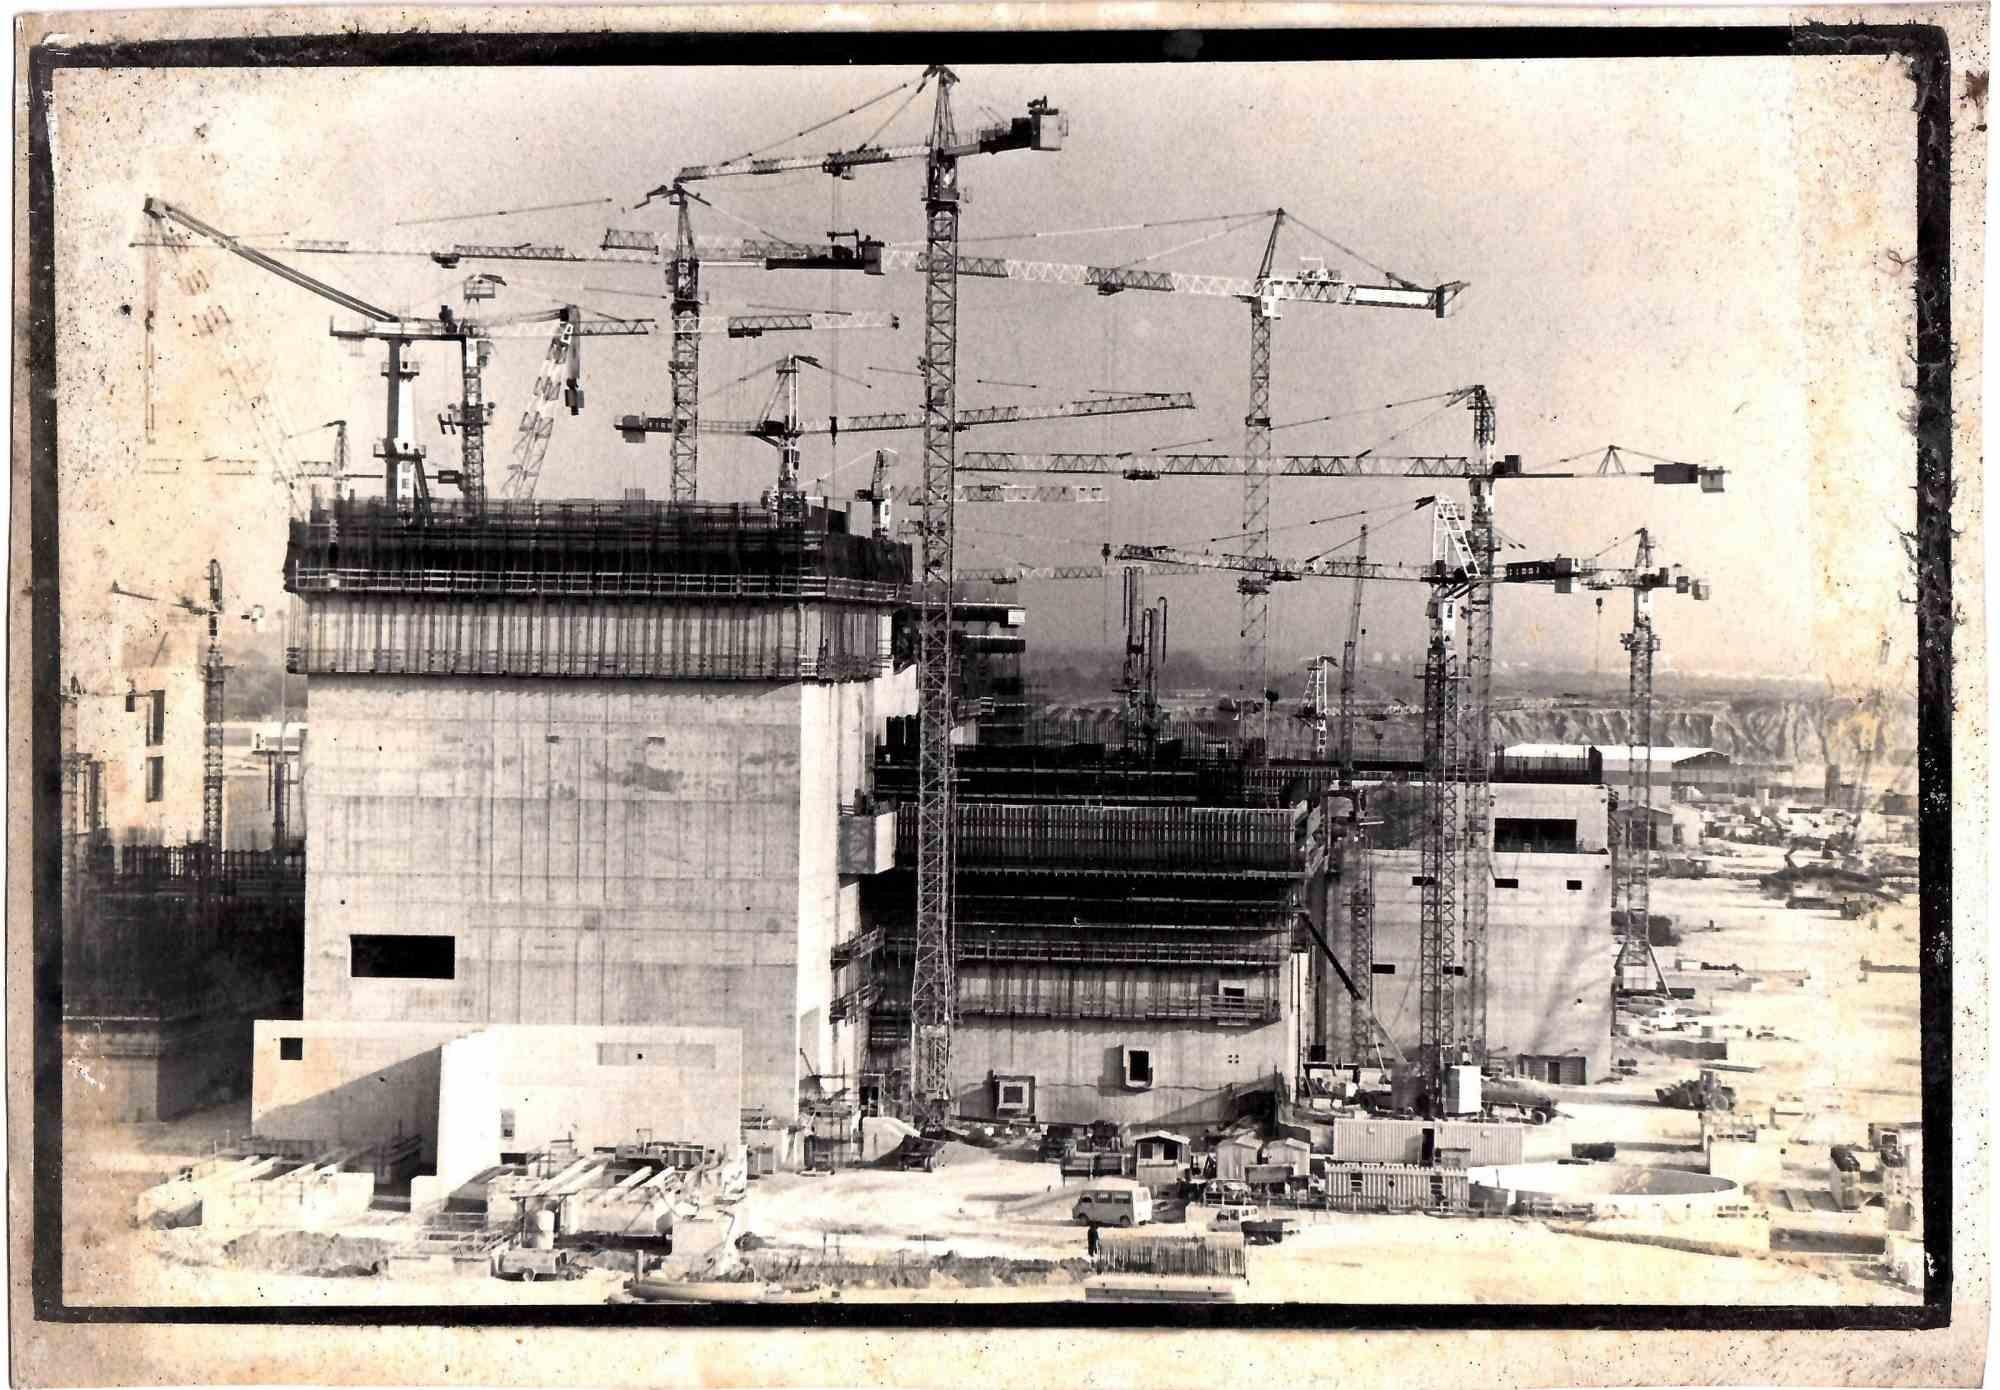 The nuclear center, vintage photograph is an original black and white photograph realized by Eligio Paoni in 1988.
Hand-signed and dated with the description on the rear.

Good conditions with foxing and sin of glue on the margins.